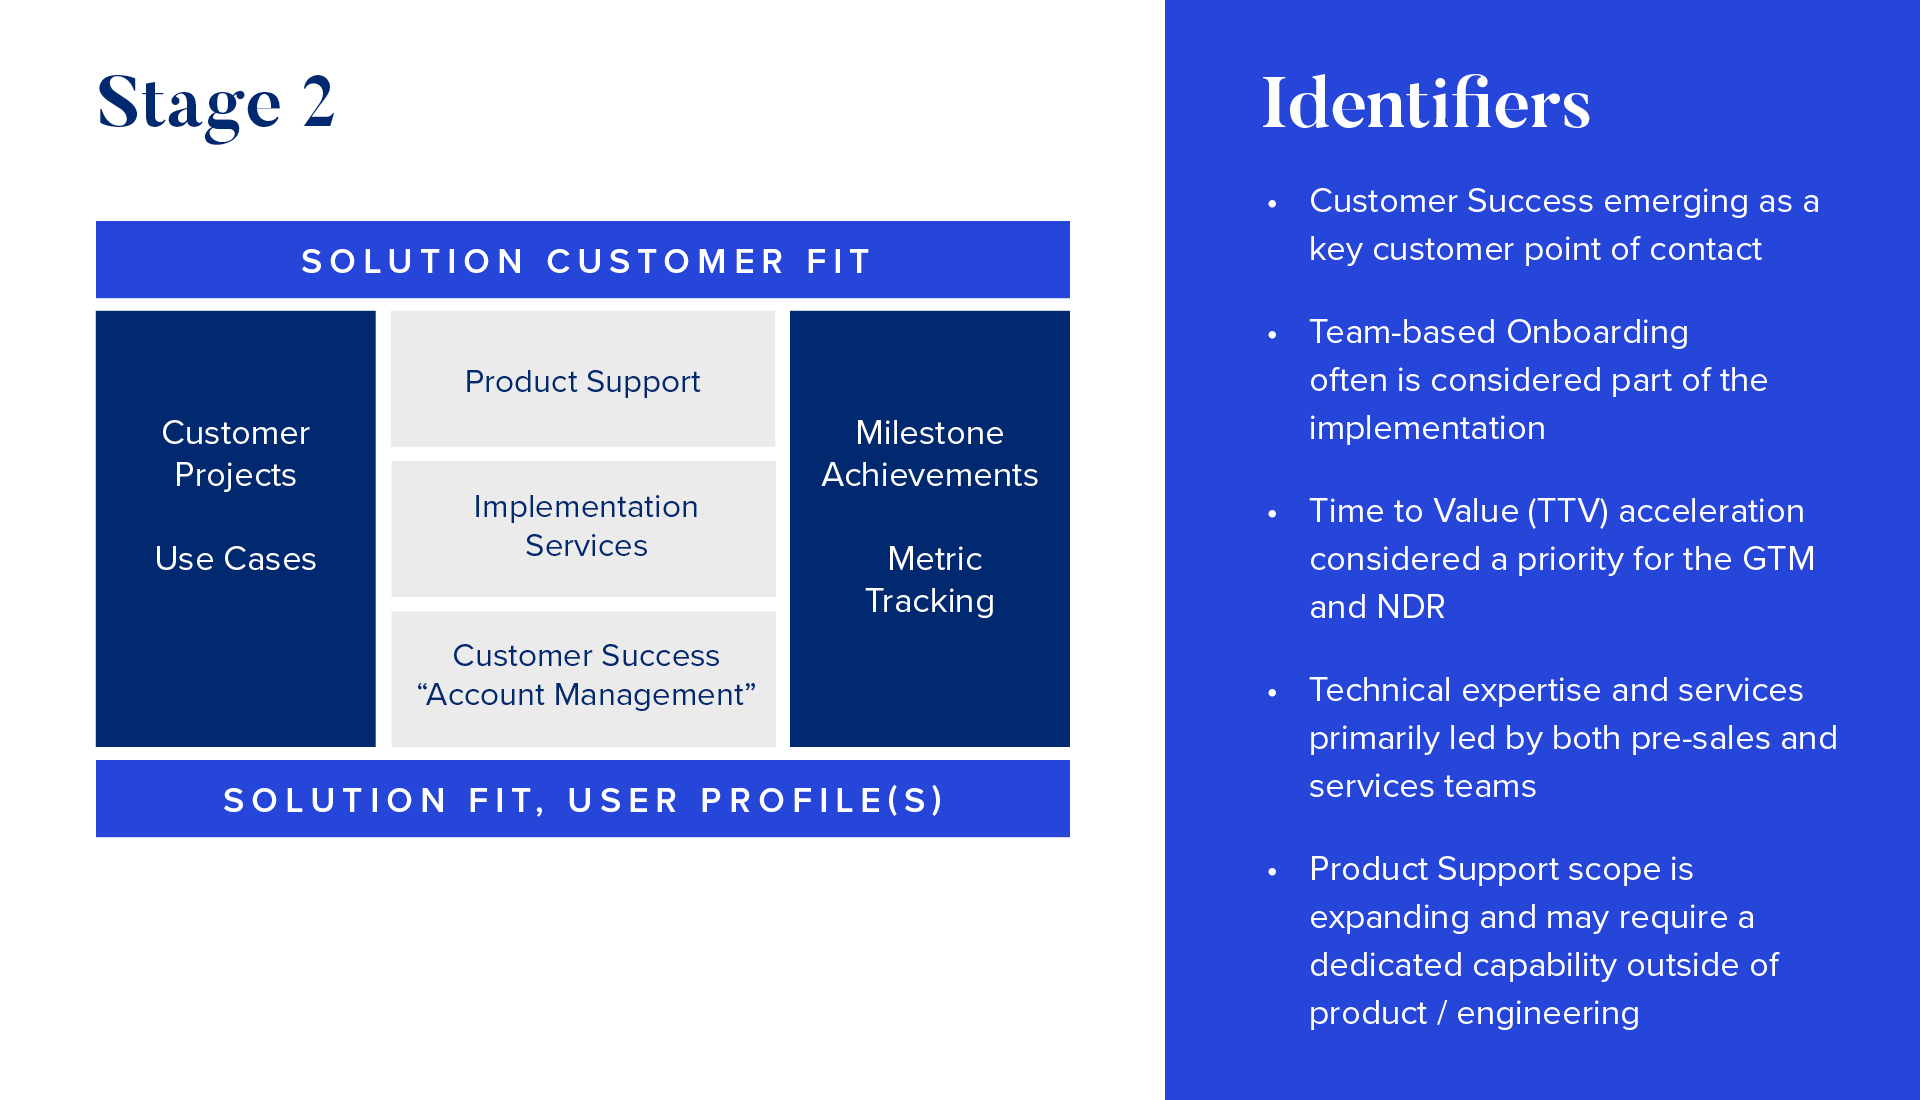 Solution Customer Fit

Identifiers: 
- Customer Success emerging as a key customer point of contact 
- Team-based Onboarding often is considered part of the implementation 
- Time to Value (TTV) acceleration considered a priority for the GTM and NDR 
- Technical expertise and services primarily led by both pre-sales and services teams 
- Product Support scope is expanding and may require a dedicated capability outside of product/engineering 
